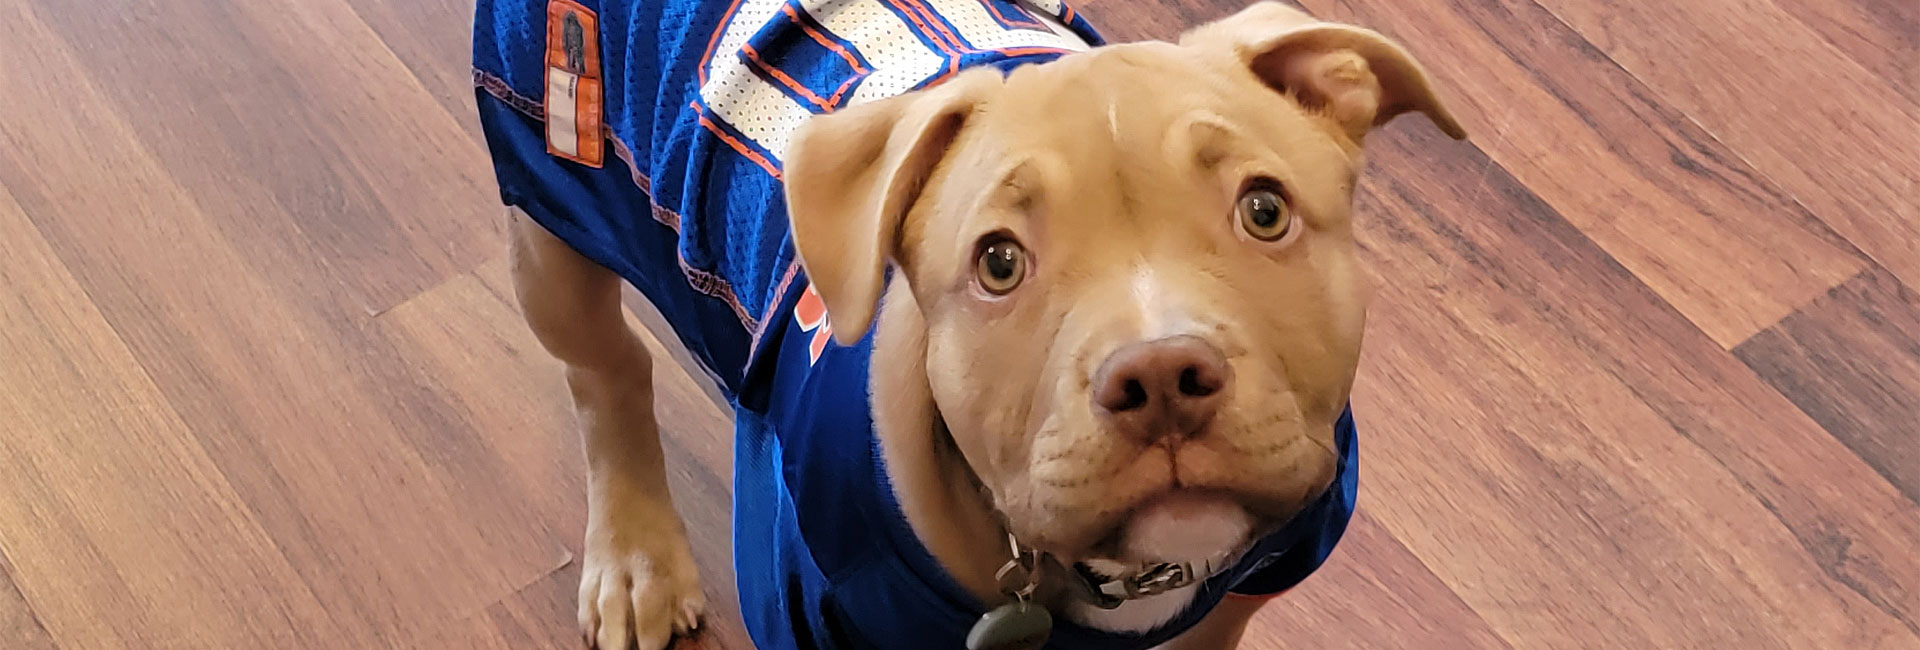 Dog dressed in jersey in waiting area